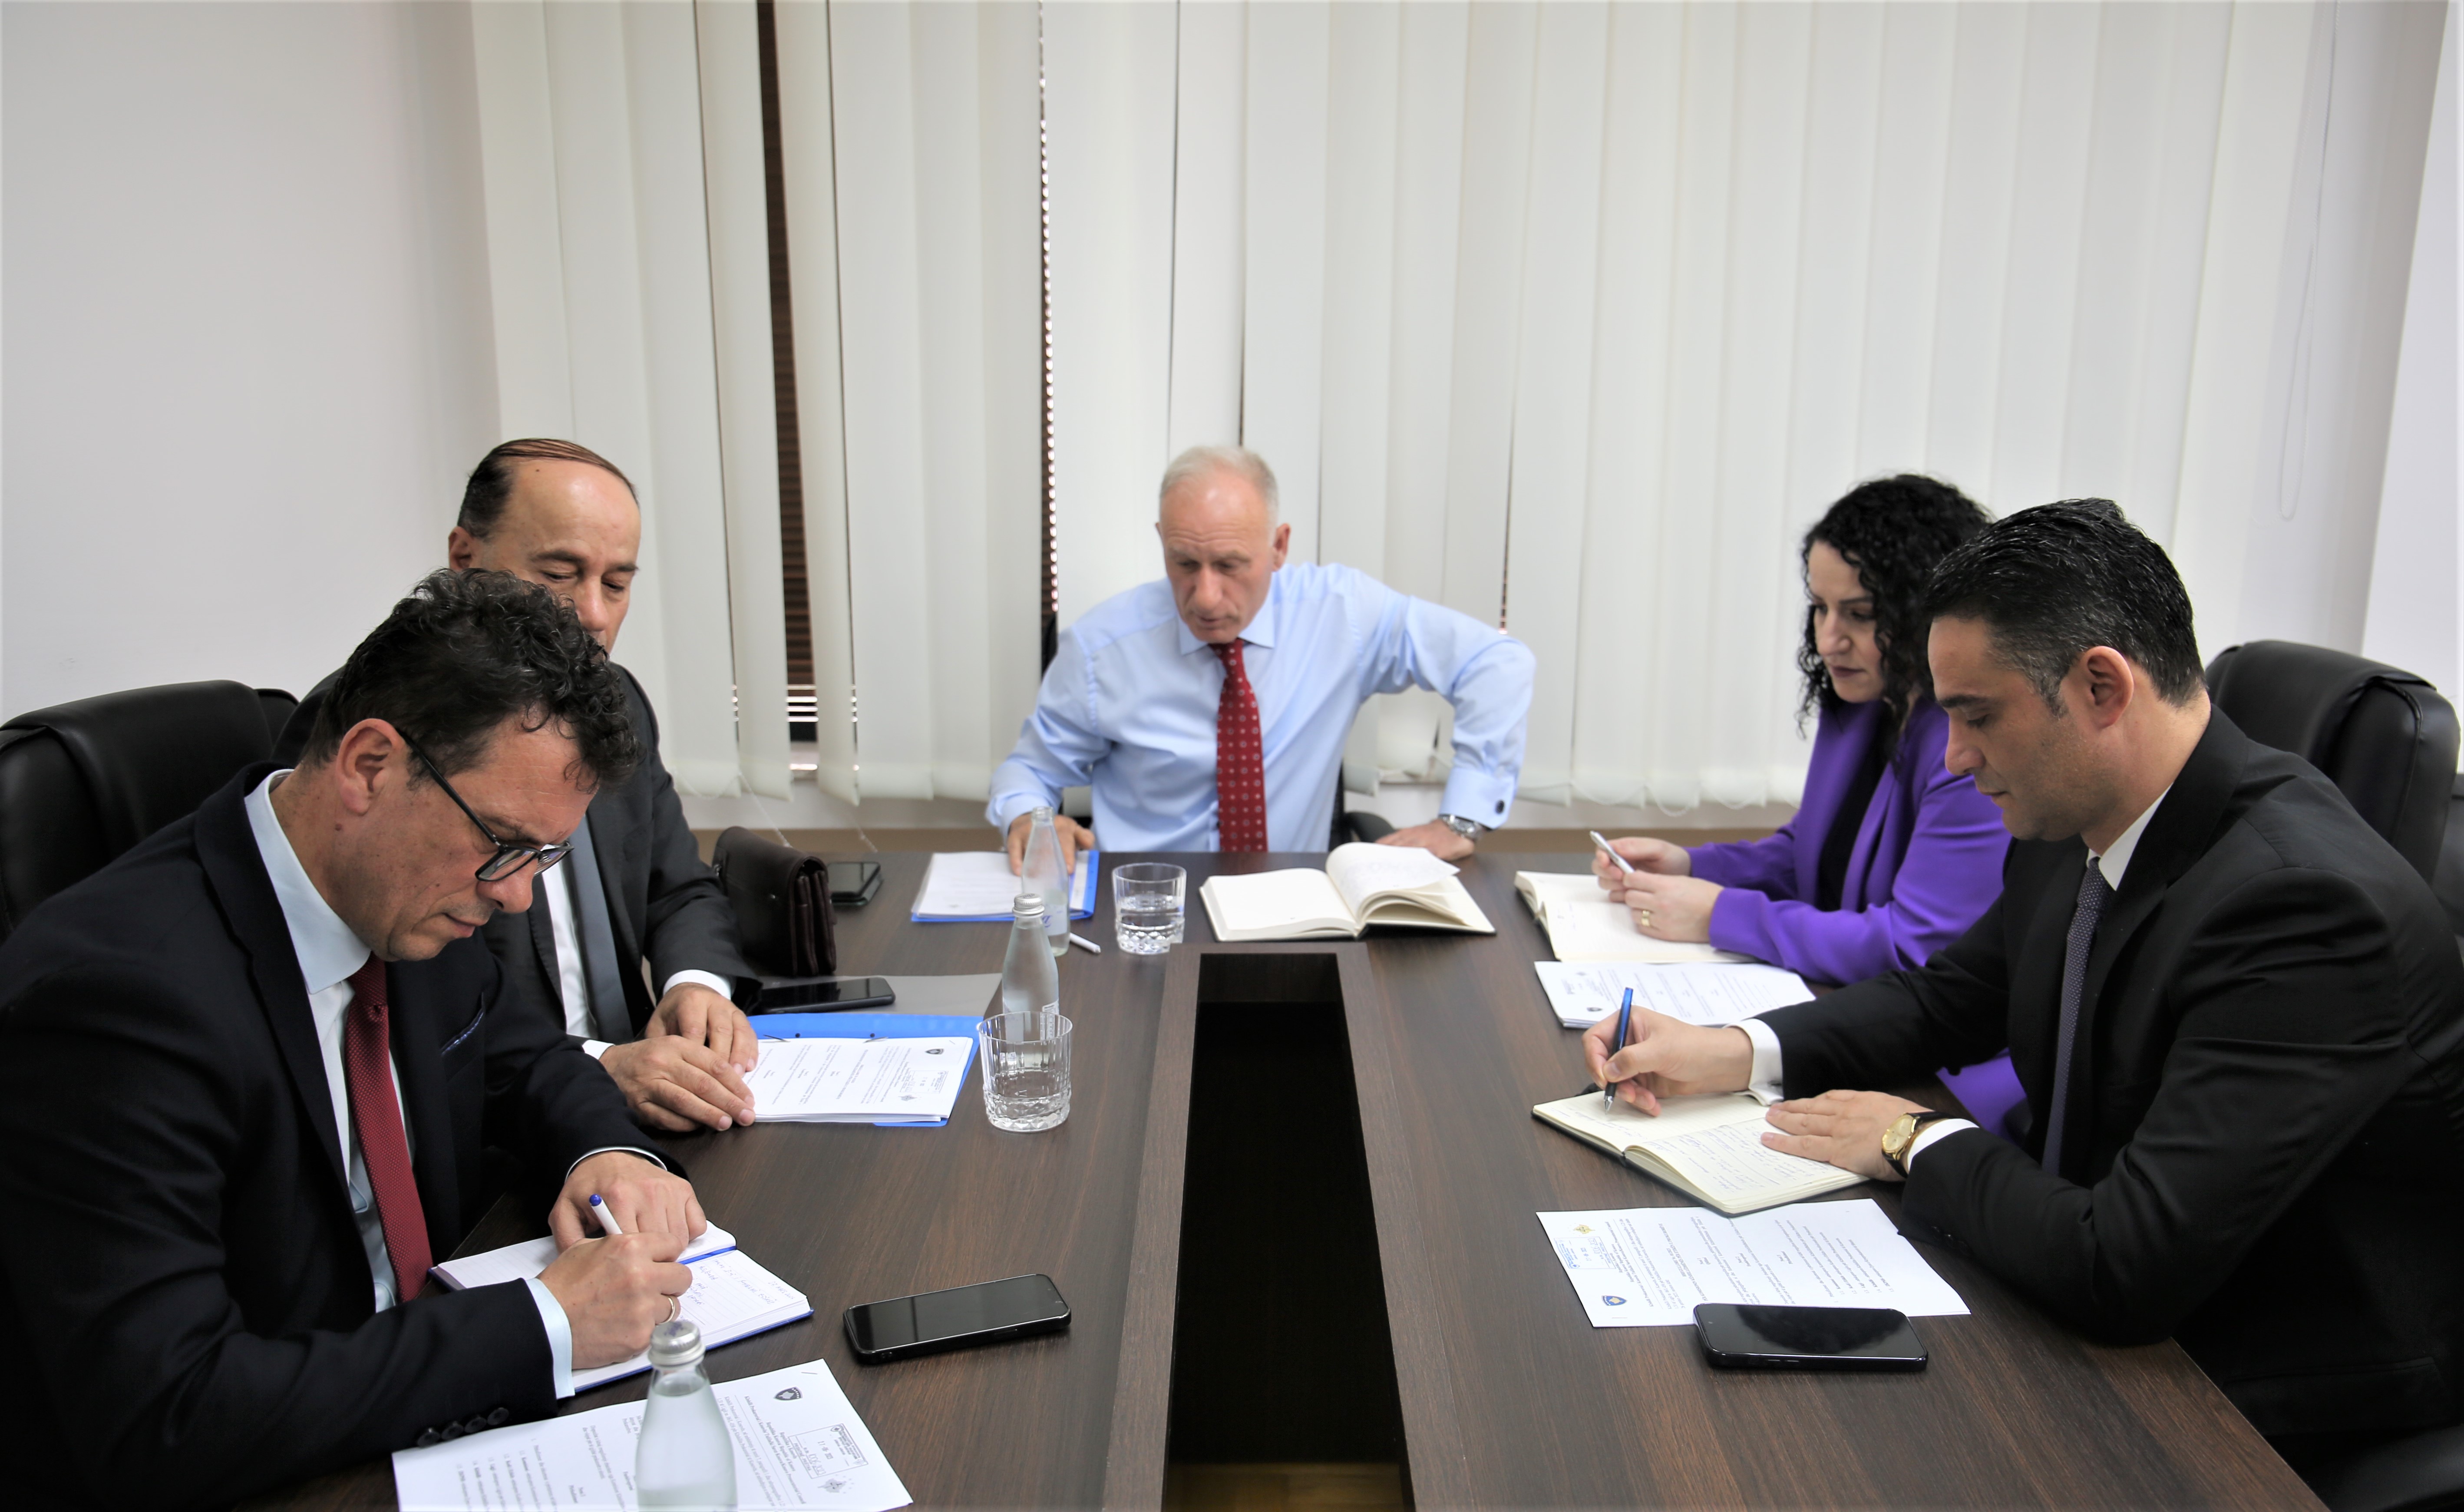 The first meeting of the Advisory Committee on the Ethics of Prosecutors is held